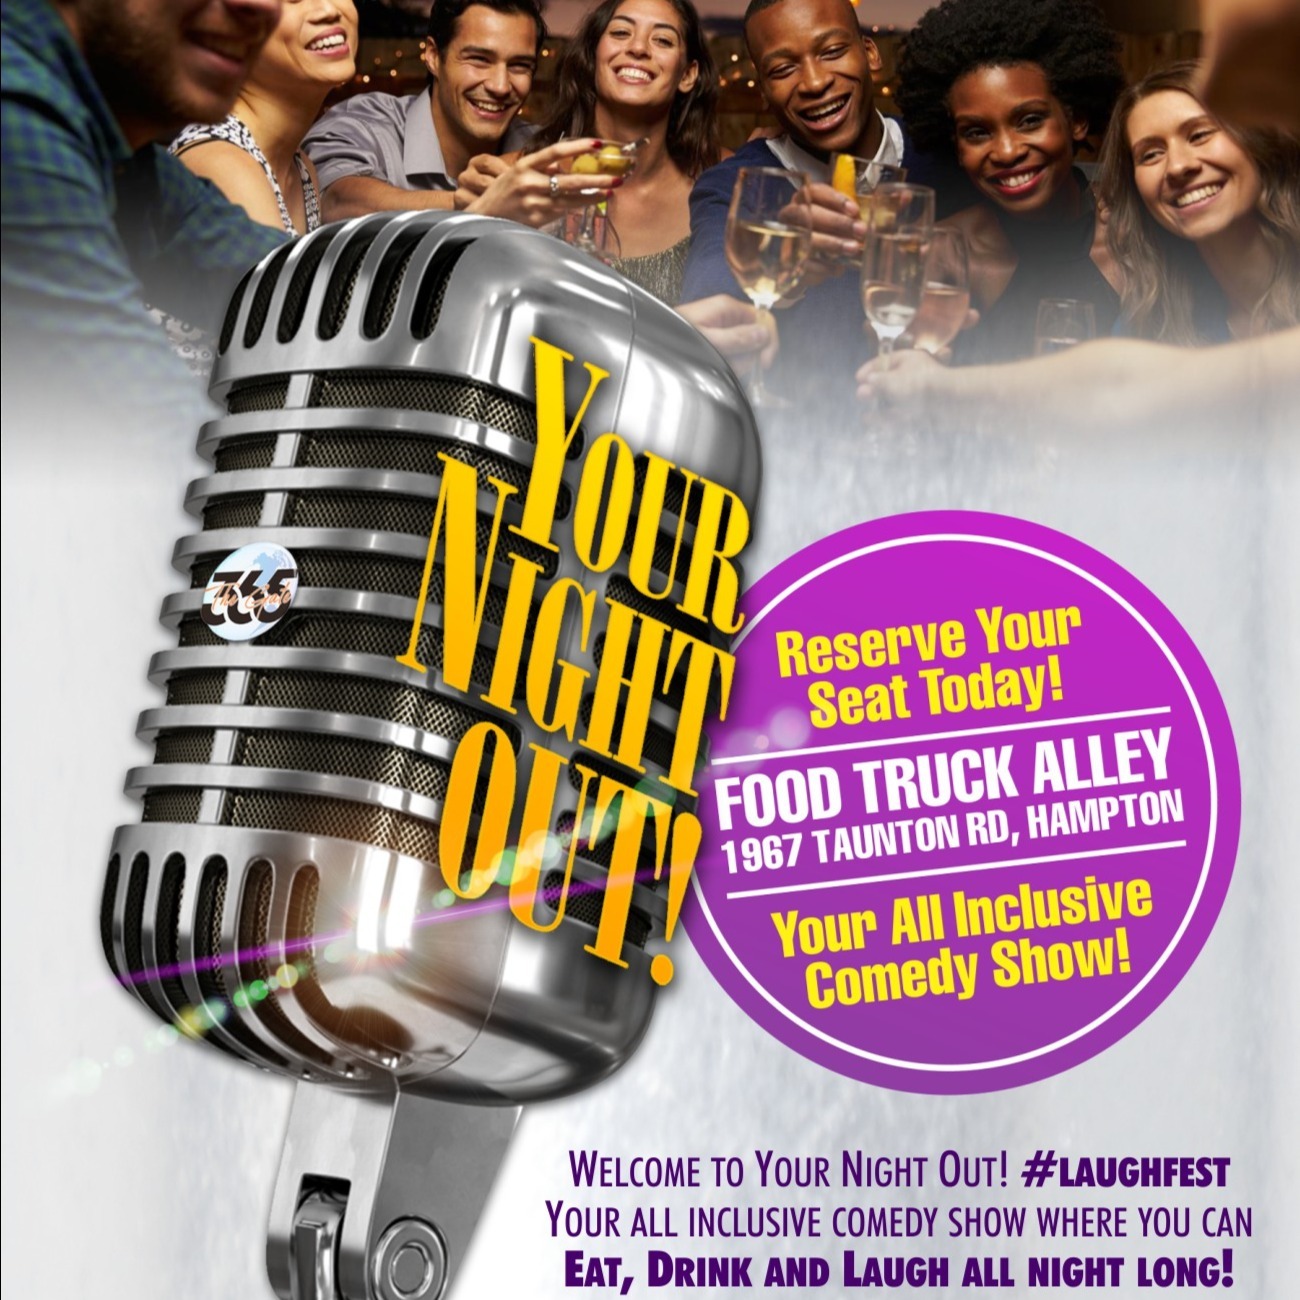 ALL INCLUSIVE Comedy Events Friday